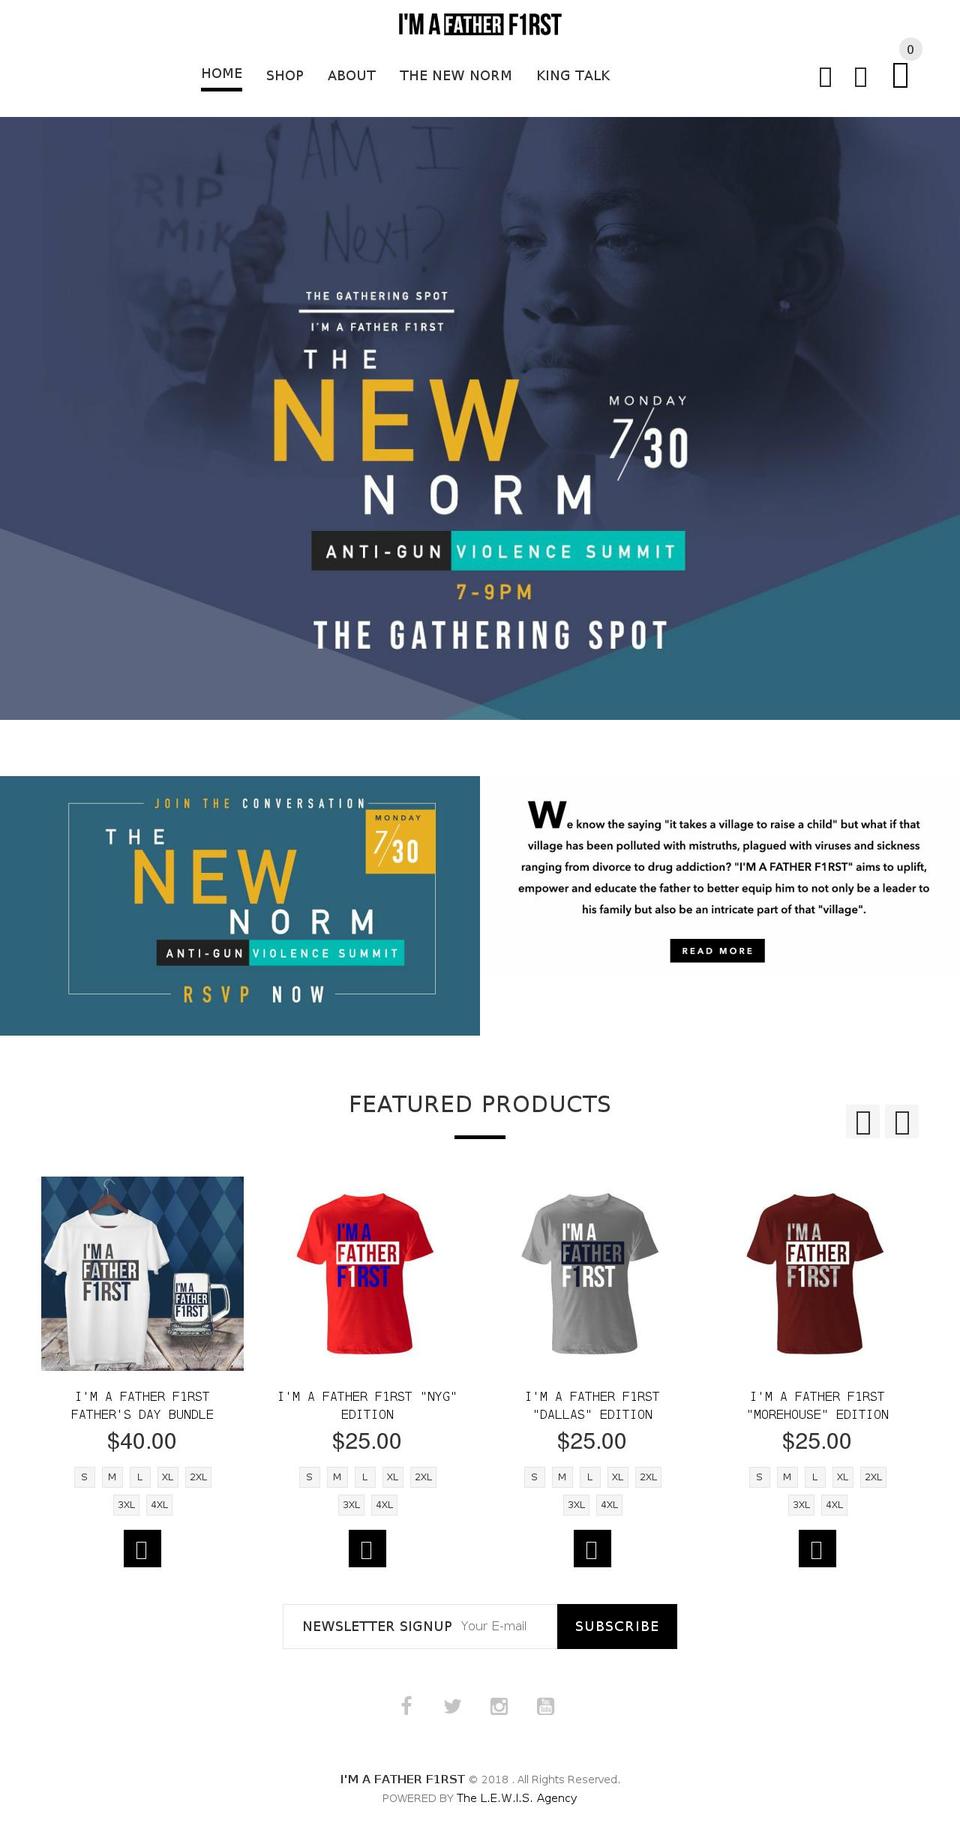 yourstore-v1-4-8 Shopify theme site example imafatherf1rst.com